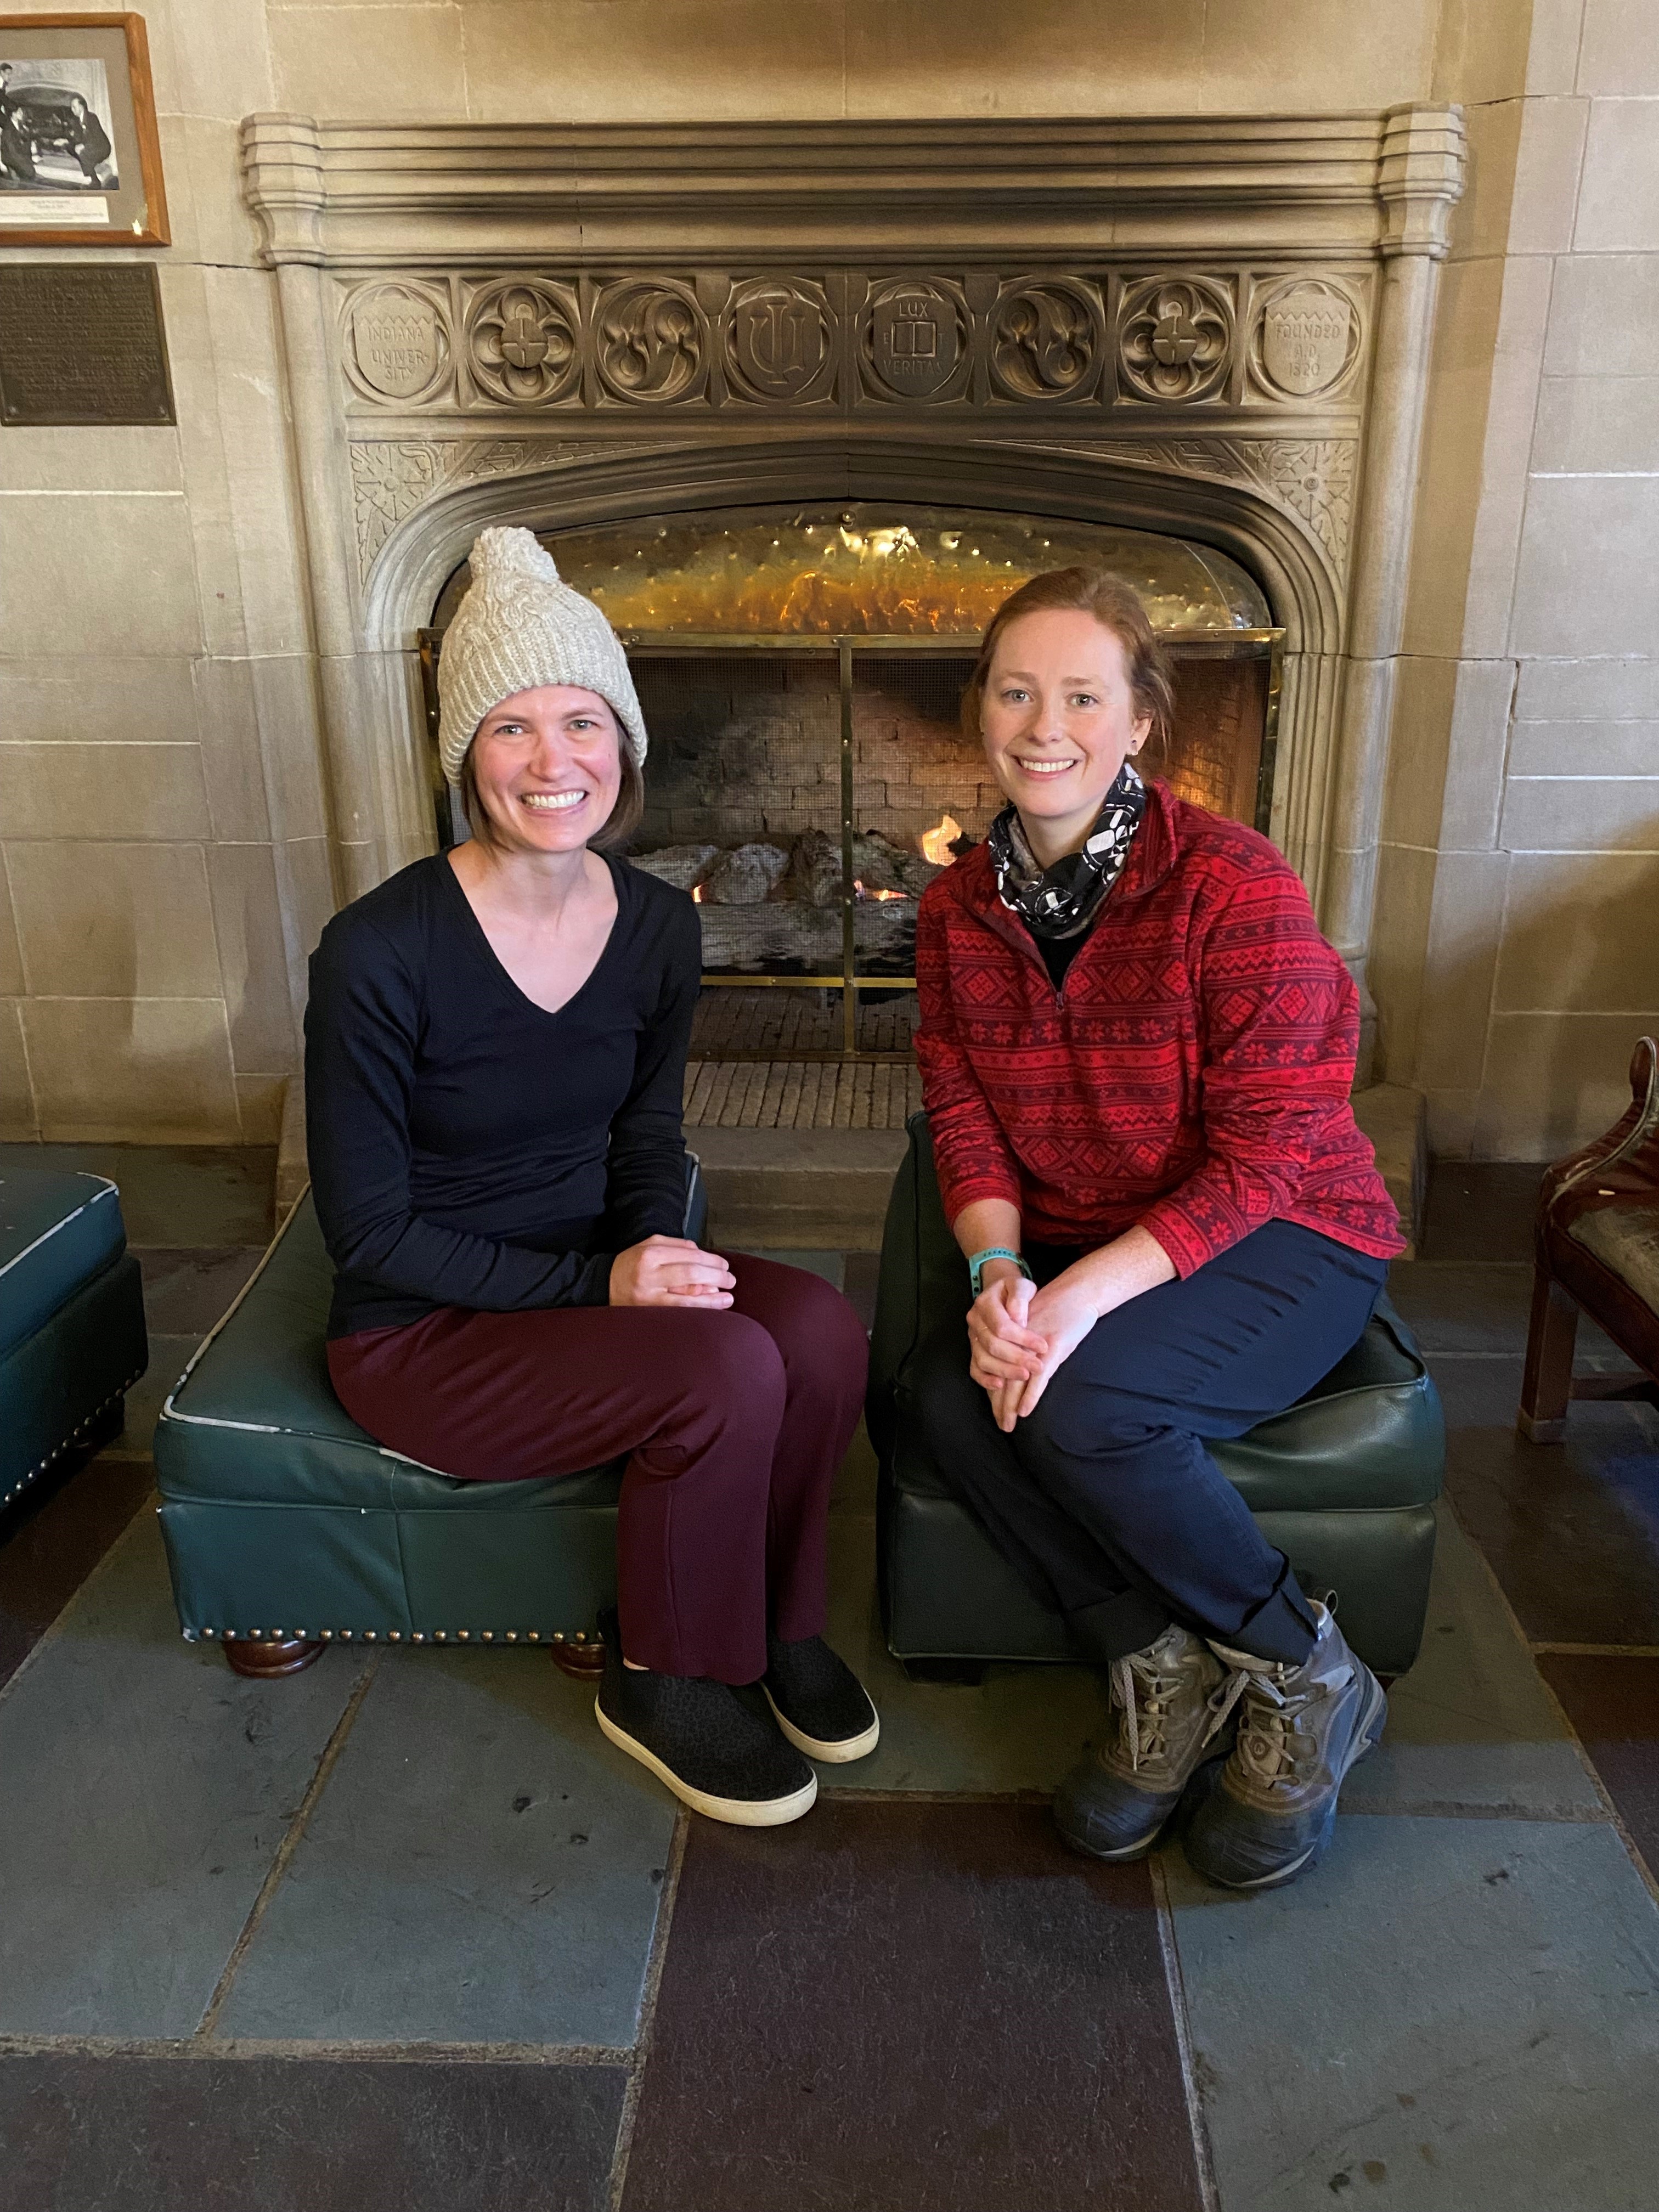 Megan and Anneliese sitting in front of a fireplace